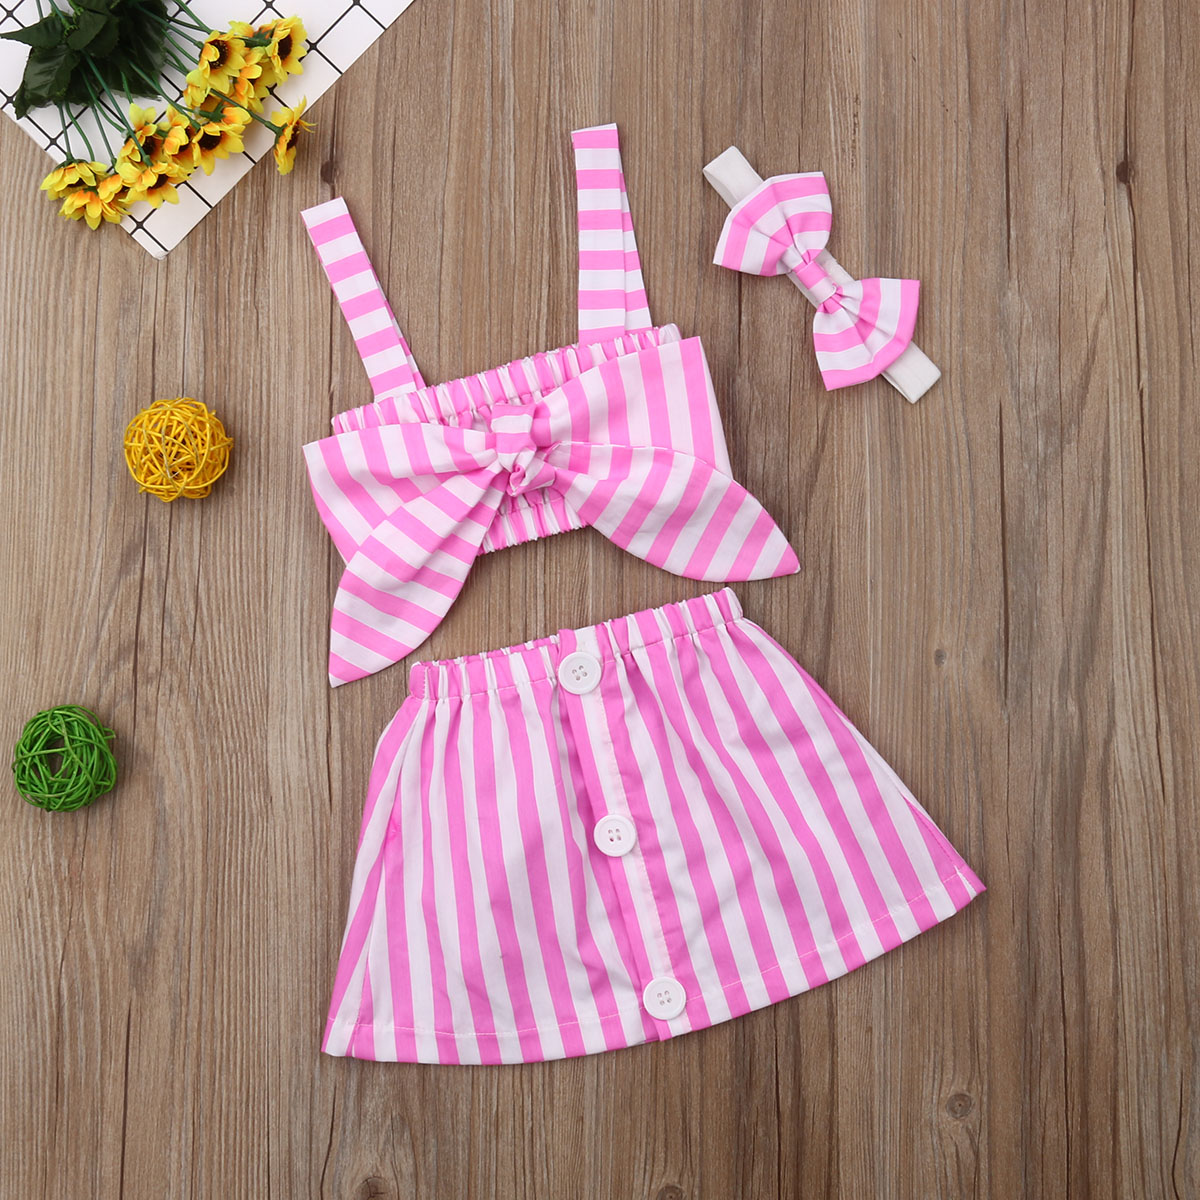 Baby Girls Outfits Clothes Bow Tie Vest Crop Tops Polka Dot Shorts Toddler Kids 